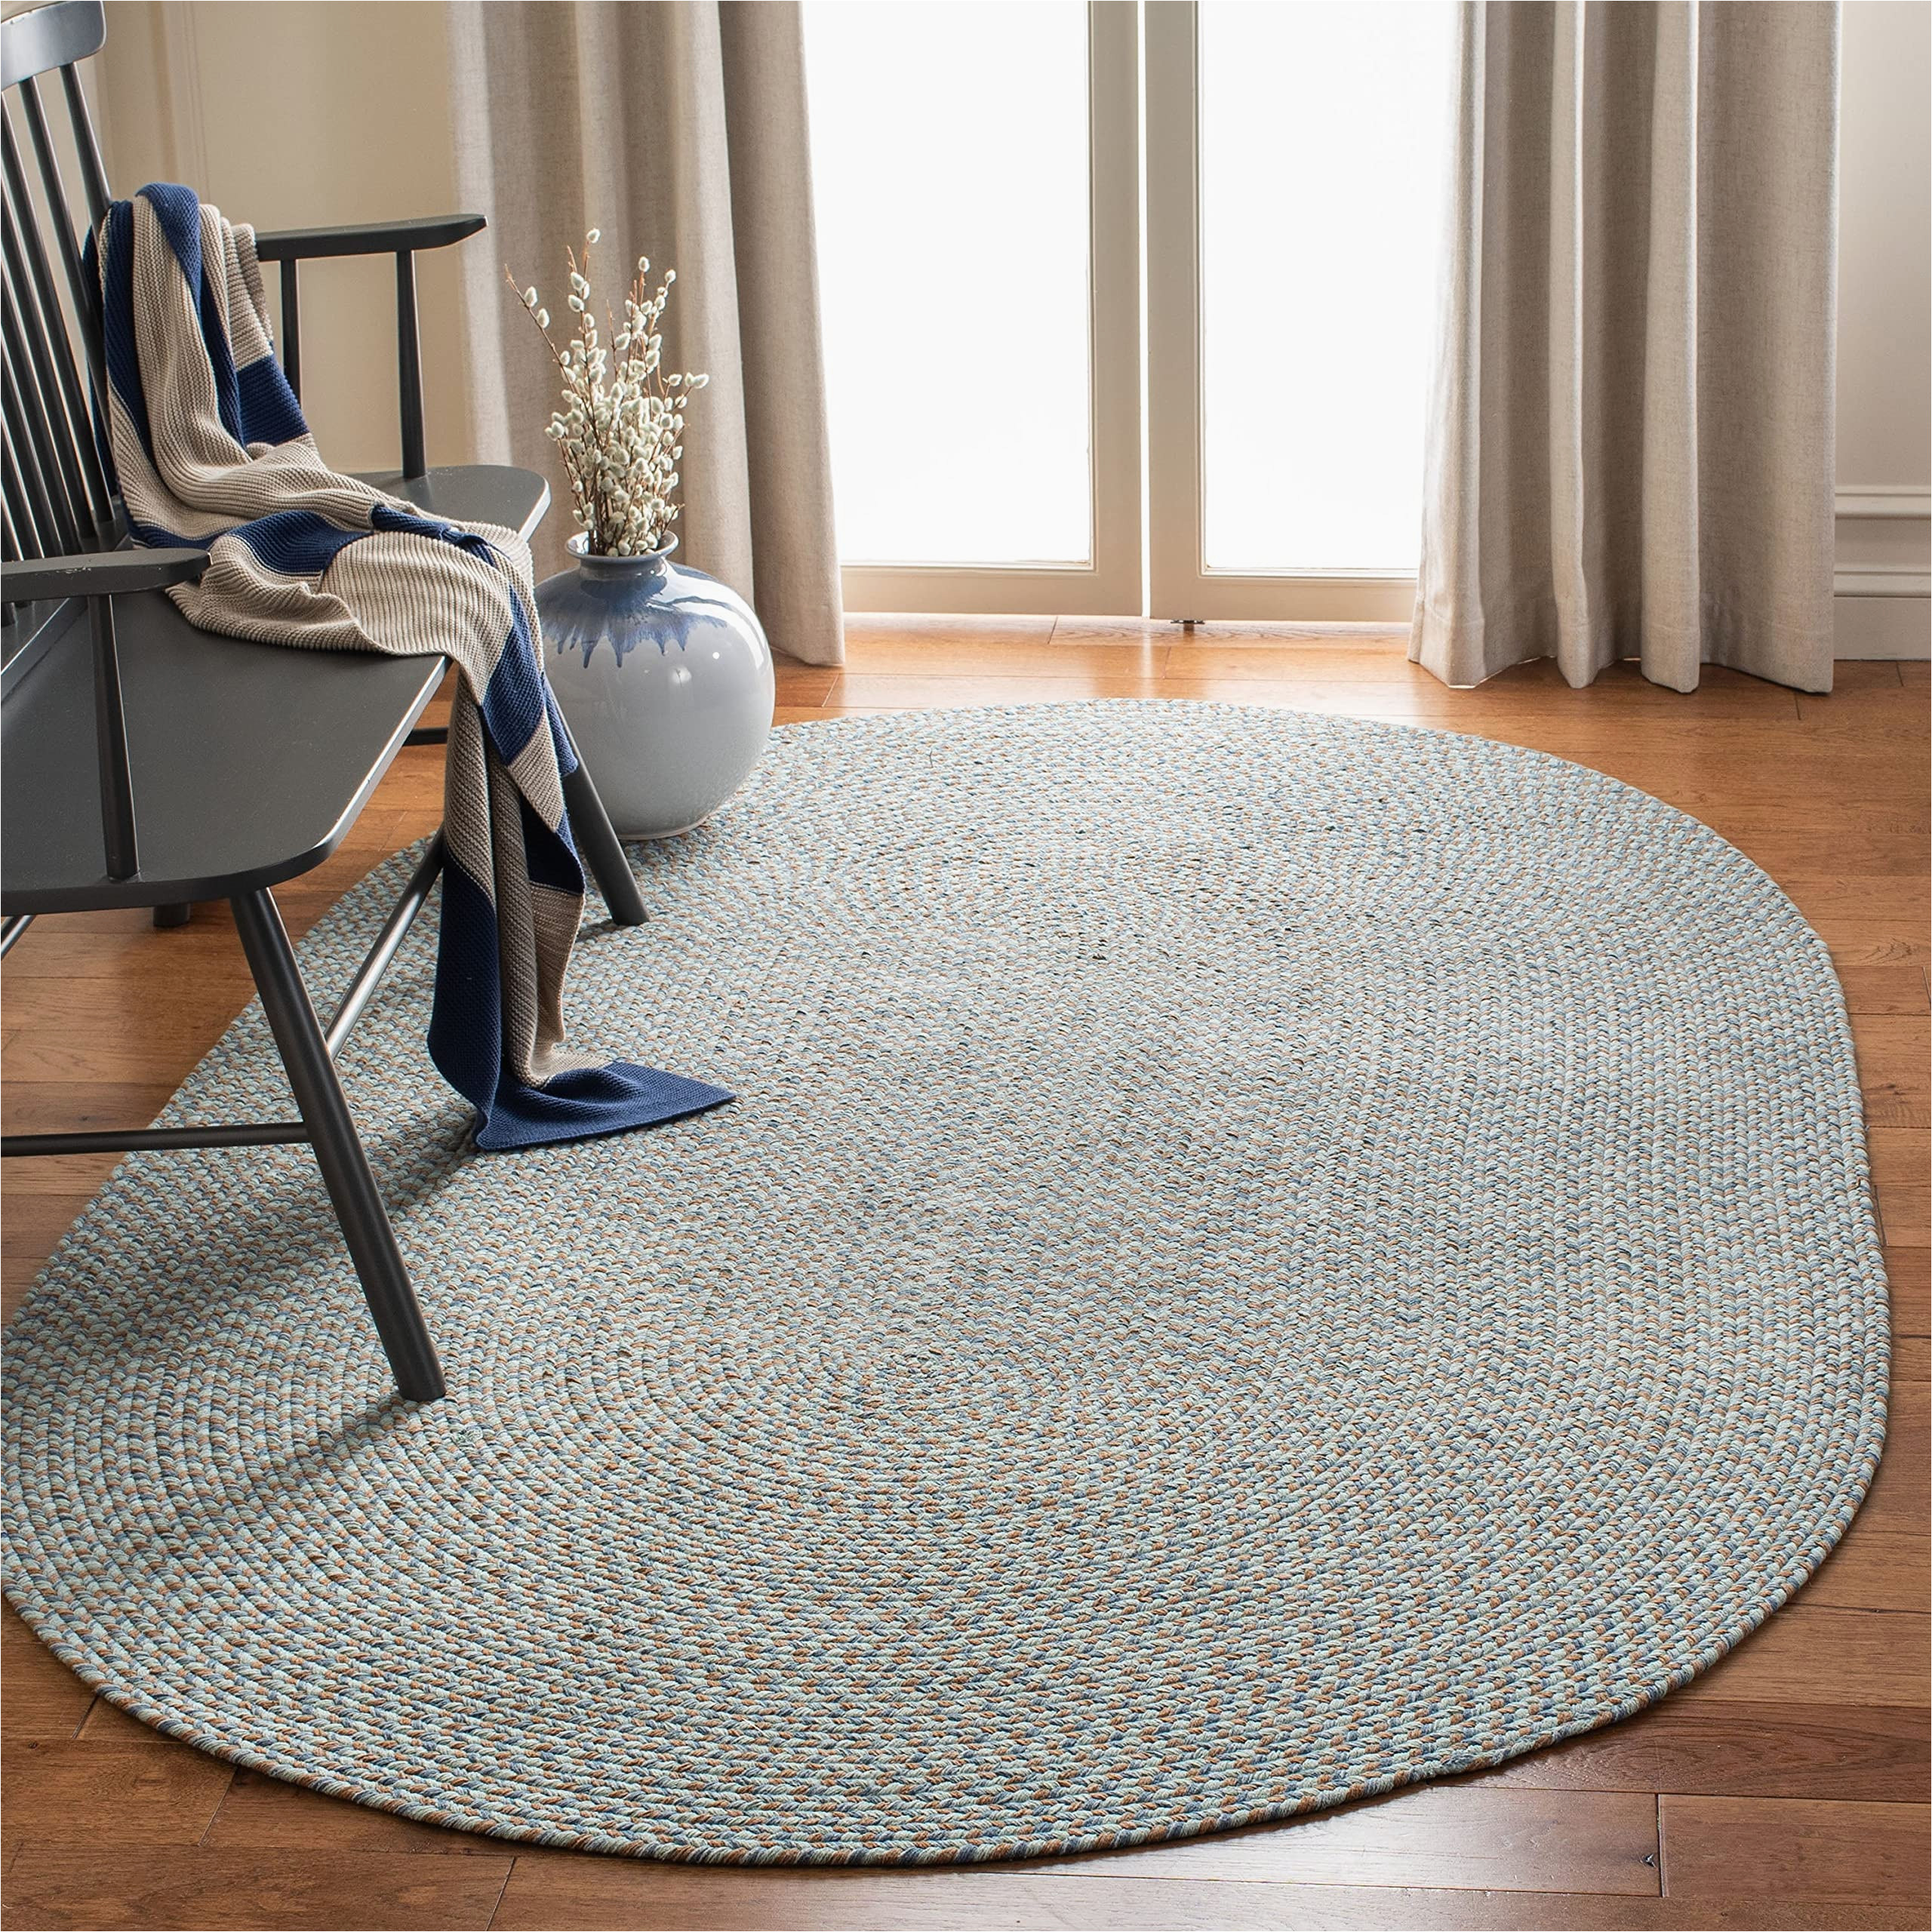 Oval area Rugs 9 X 12 Safavieh Braided Collection 9′ X 12′ Oval Multi Brd170a Handmade Country Cottage Reversible Cotton area Rug